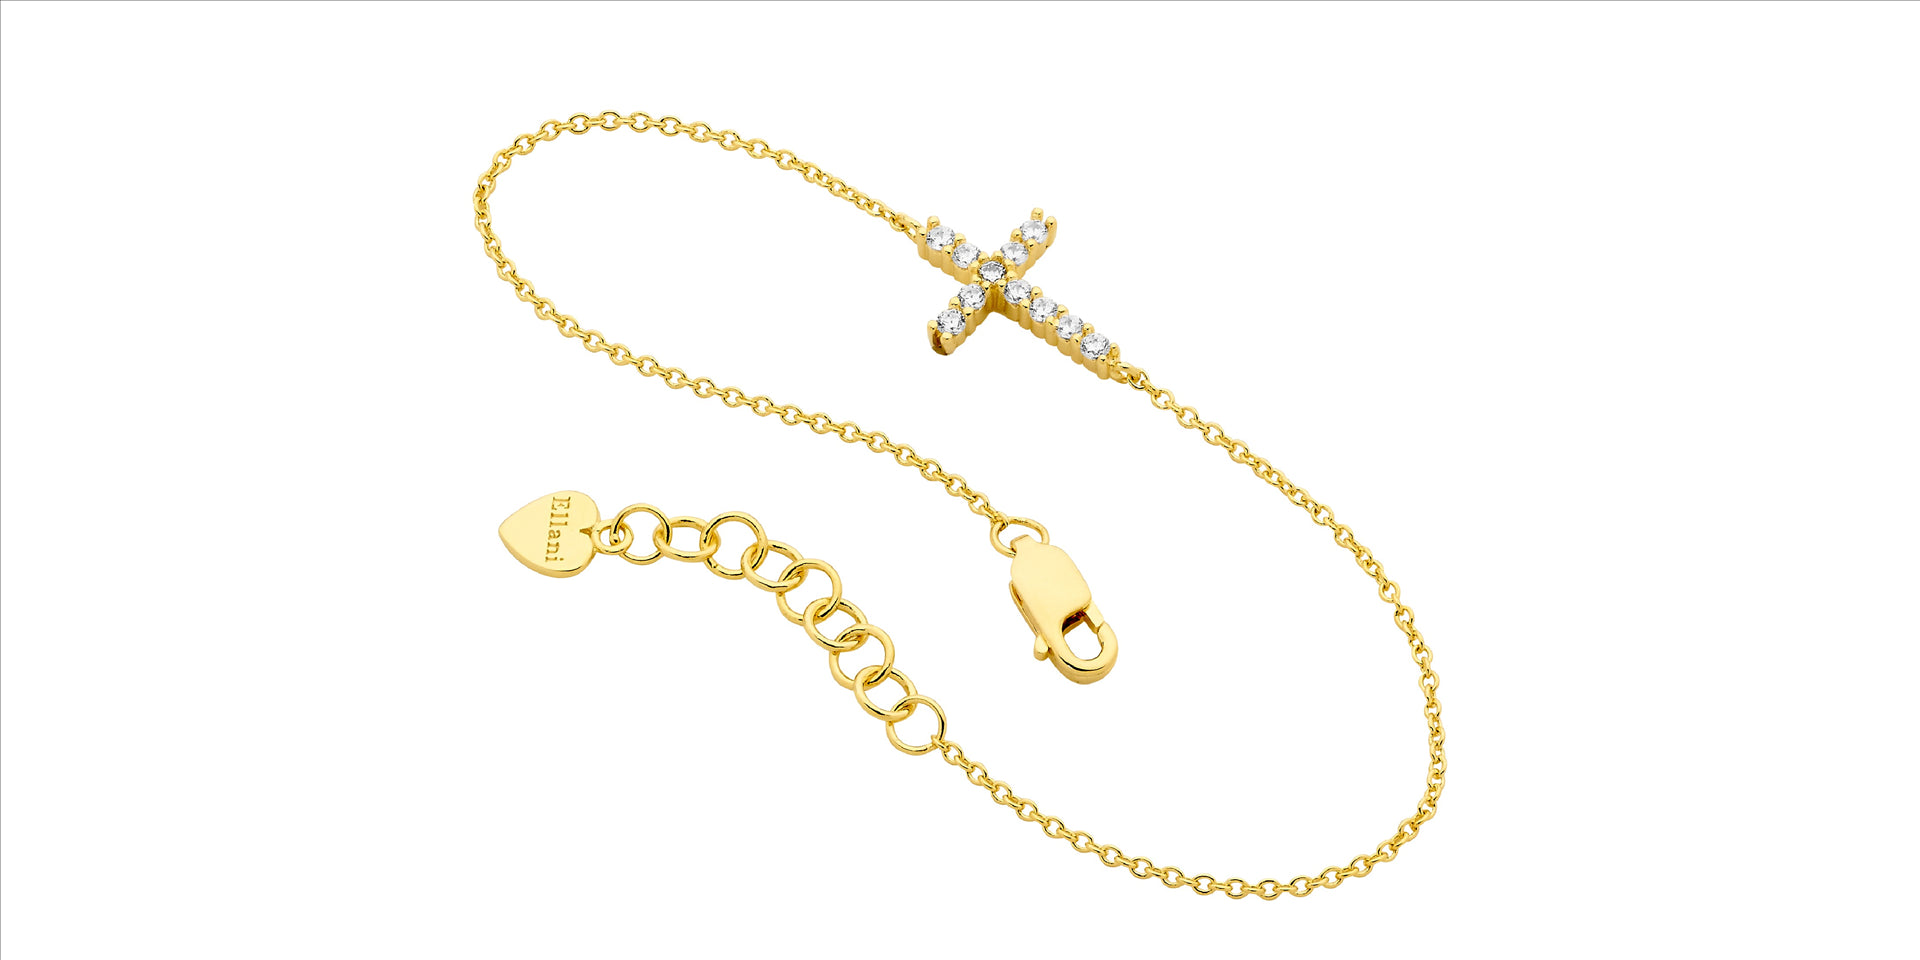 Ellani Sterling Silver Cubic Zirconium Small Cross Bracelet With Gold Plating